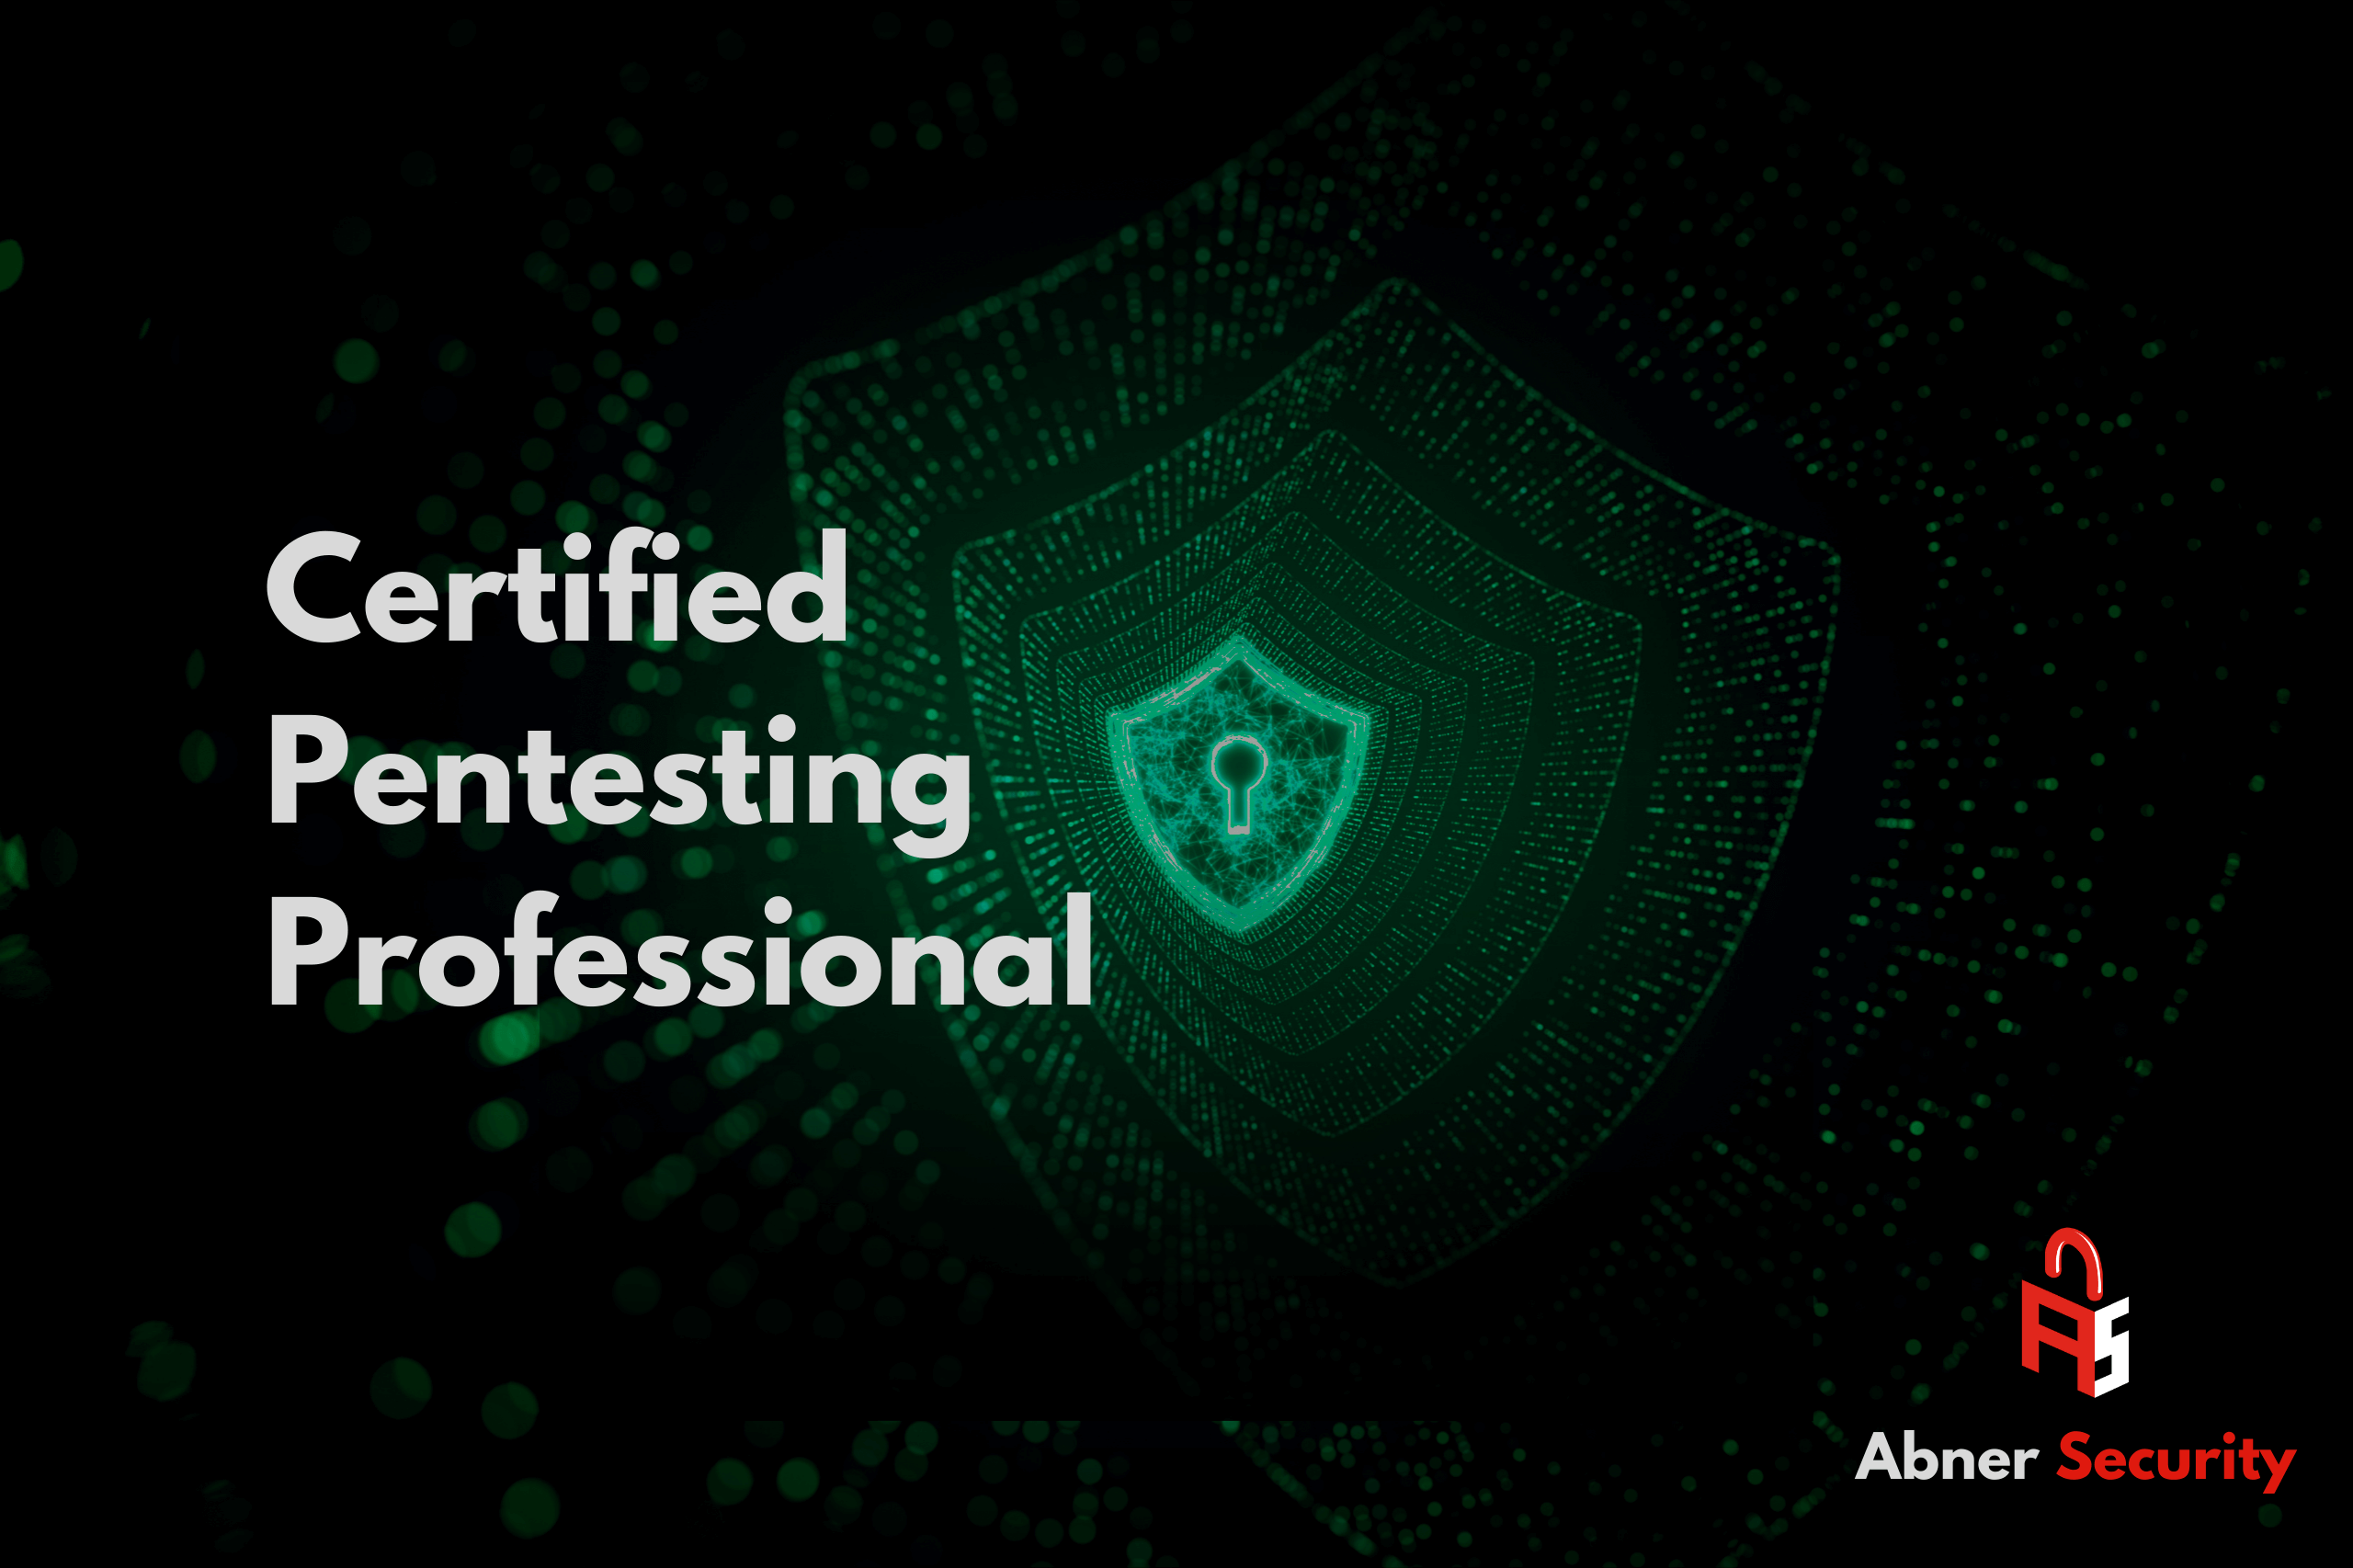 ABNERSECURITY CERTIFIED PENTESTING PROFESSIONAL